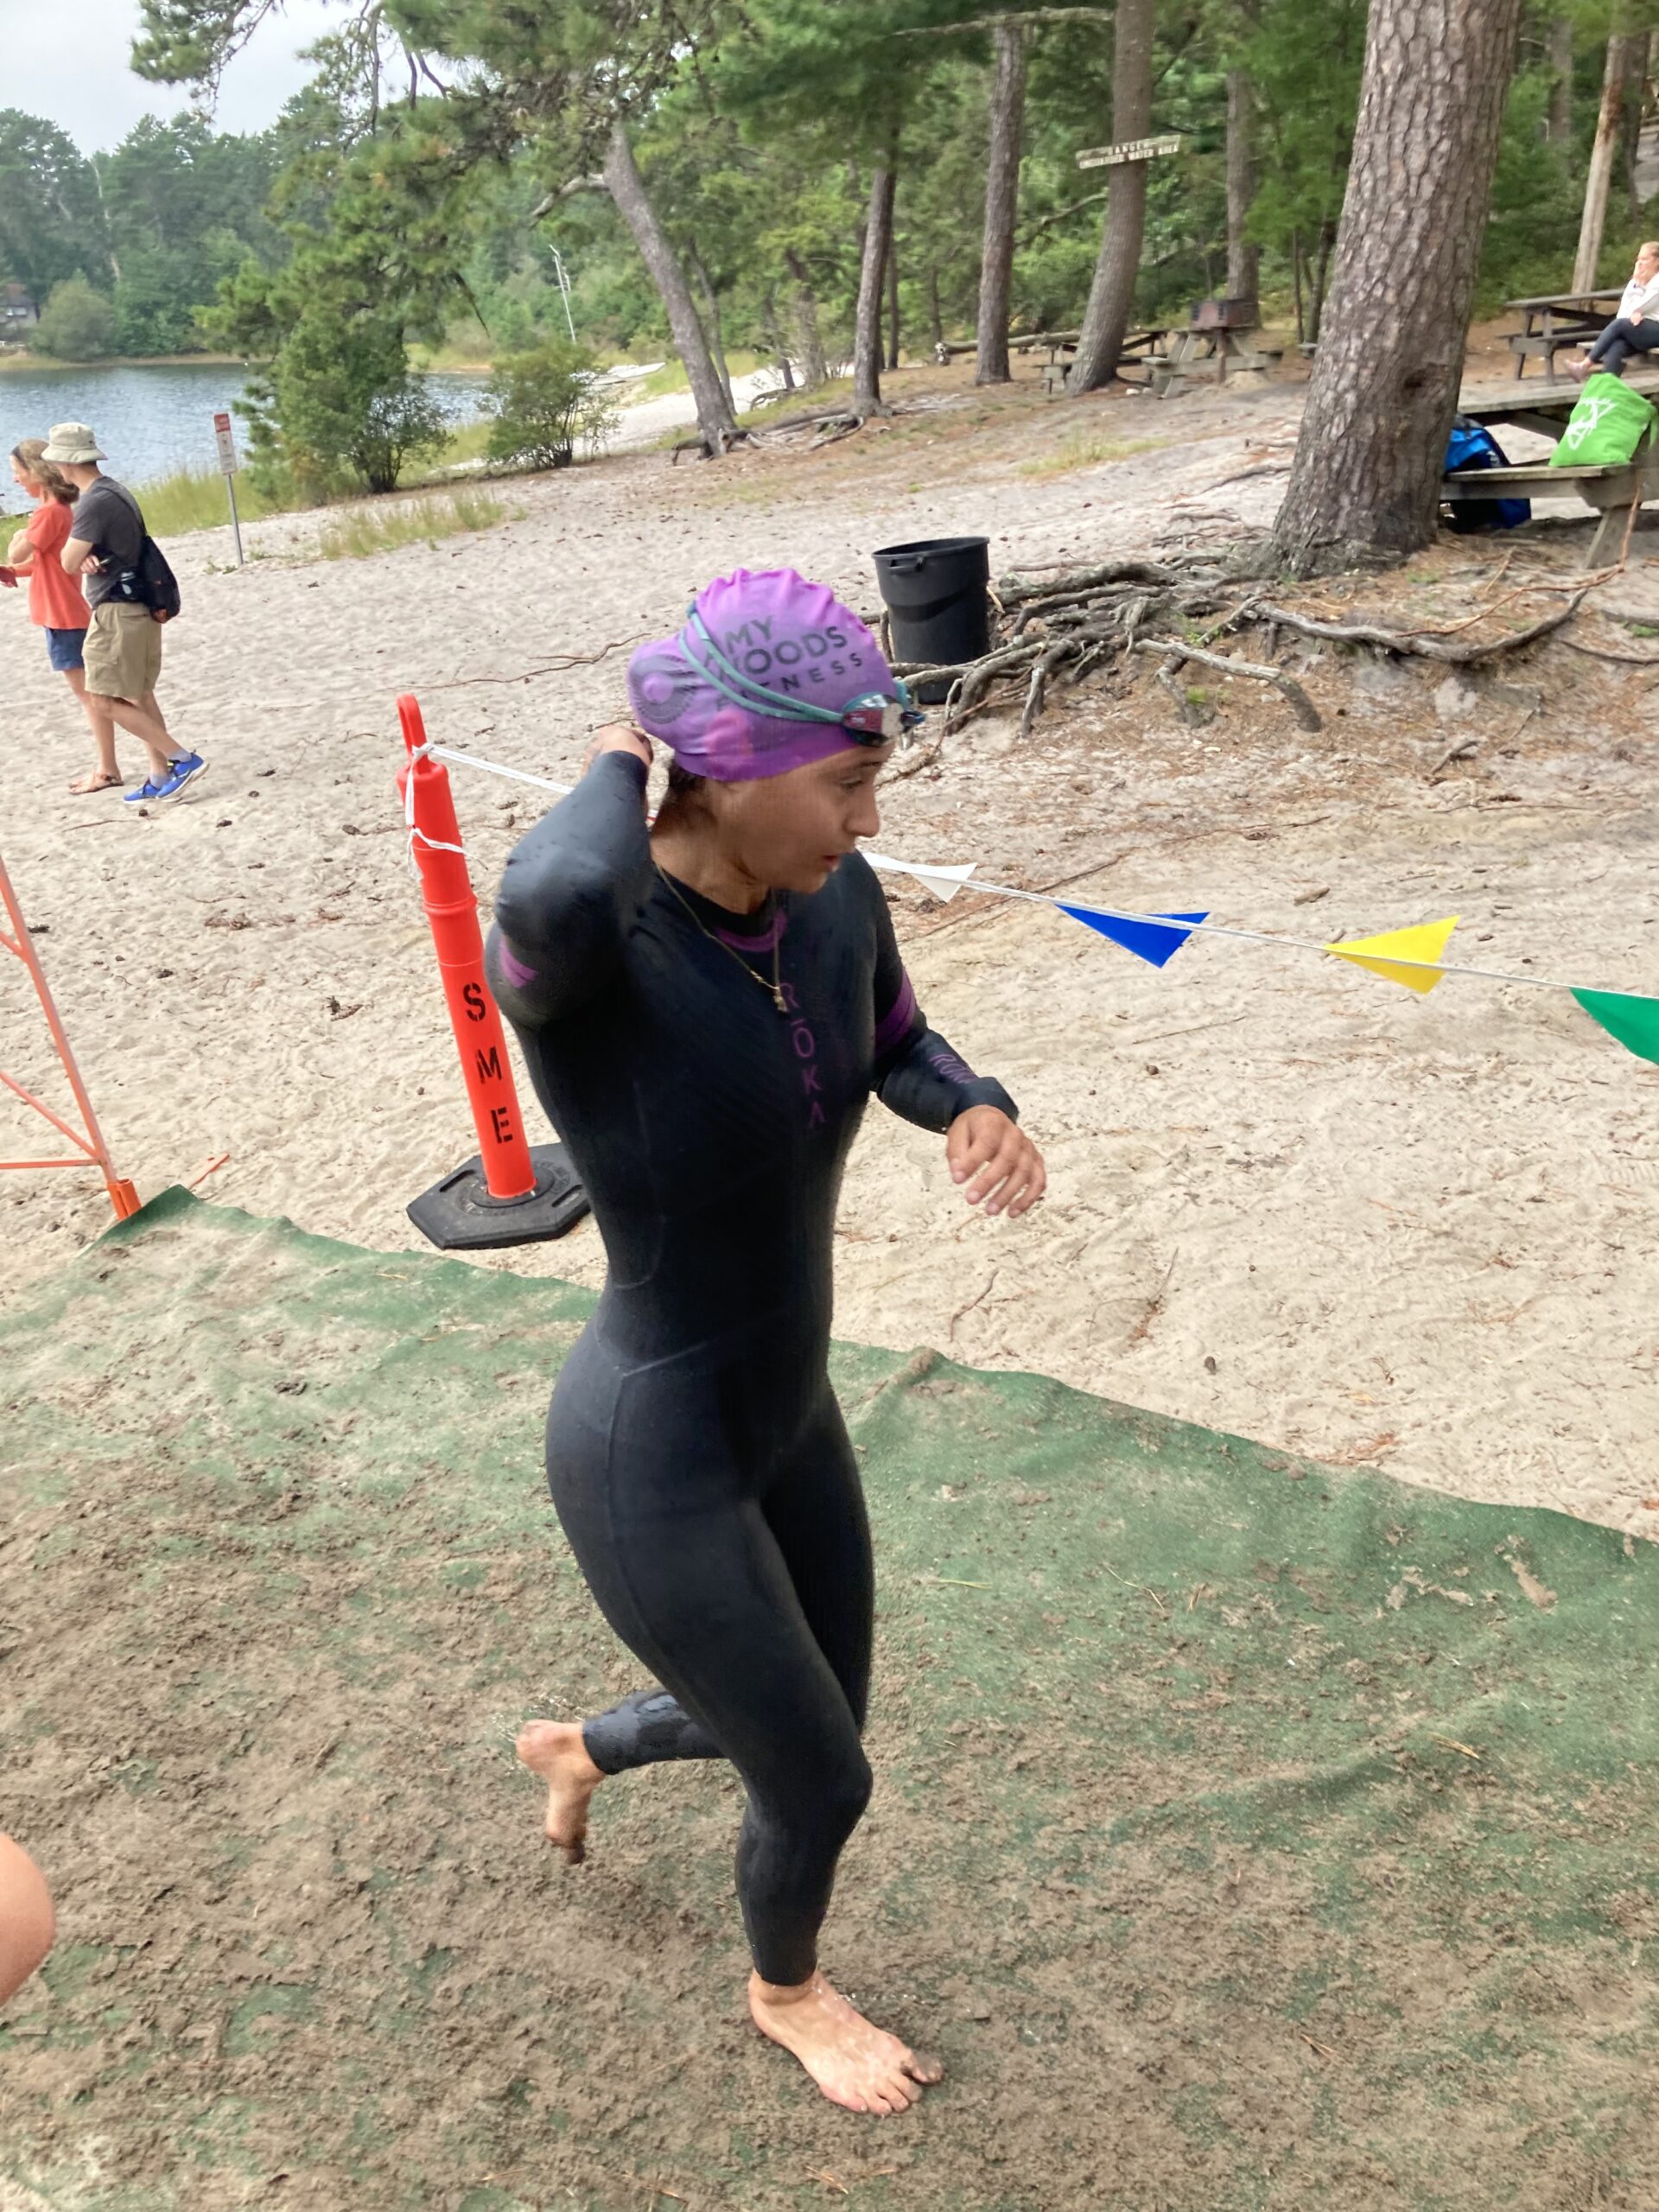 Triathlete unzipping swimsuit during transition.